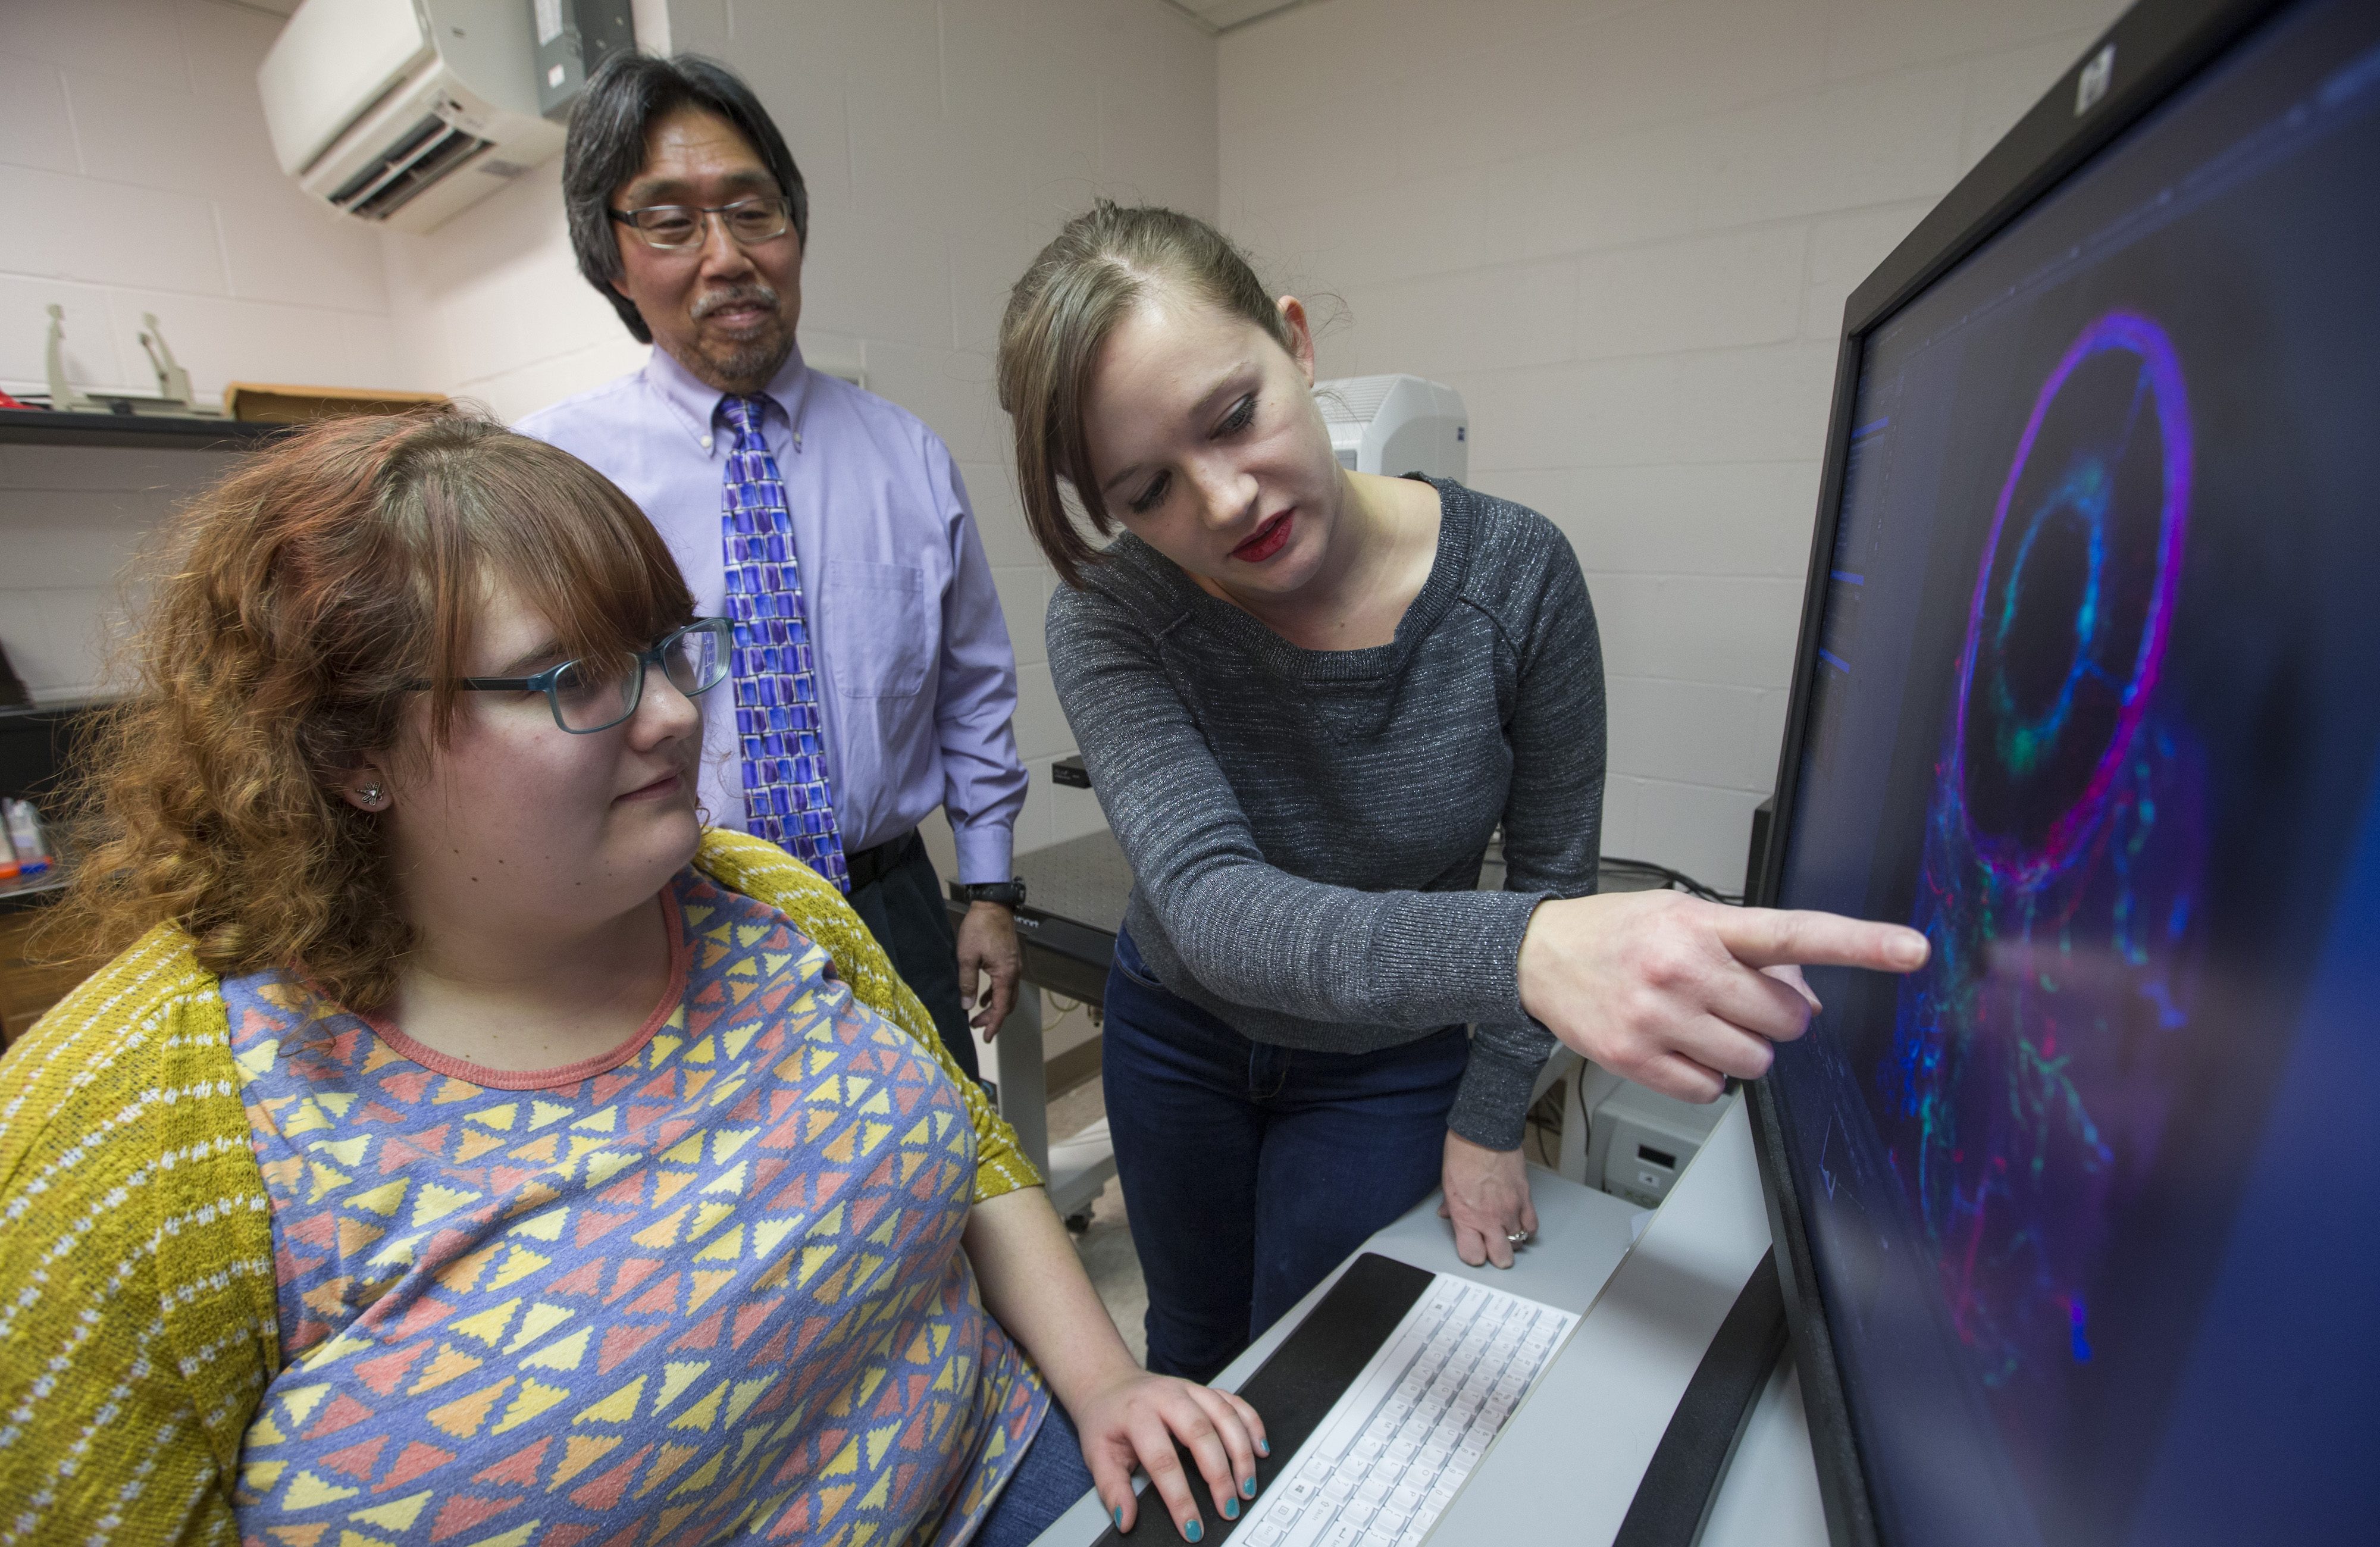 Two students and a professor are gathered around a computer with a colorful display of an enlarged eye, one student points to the screen.